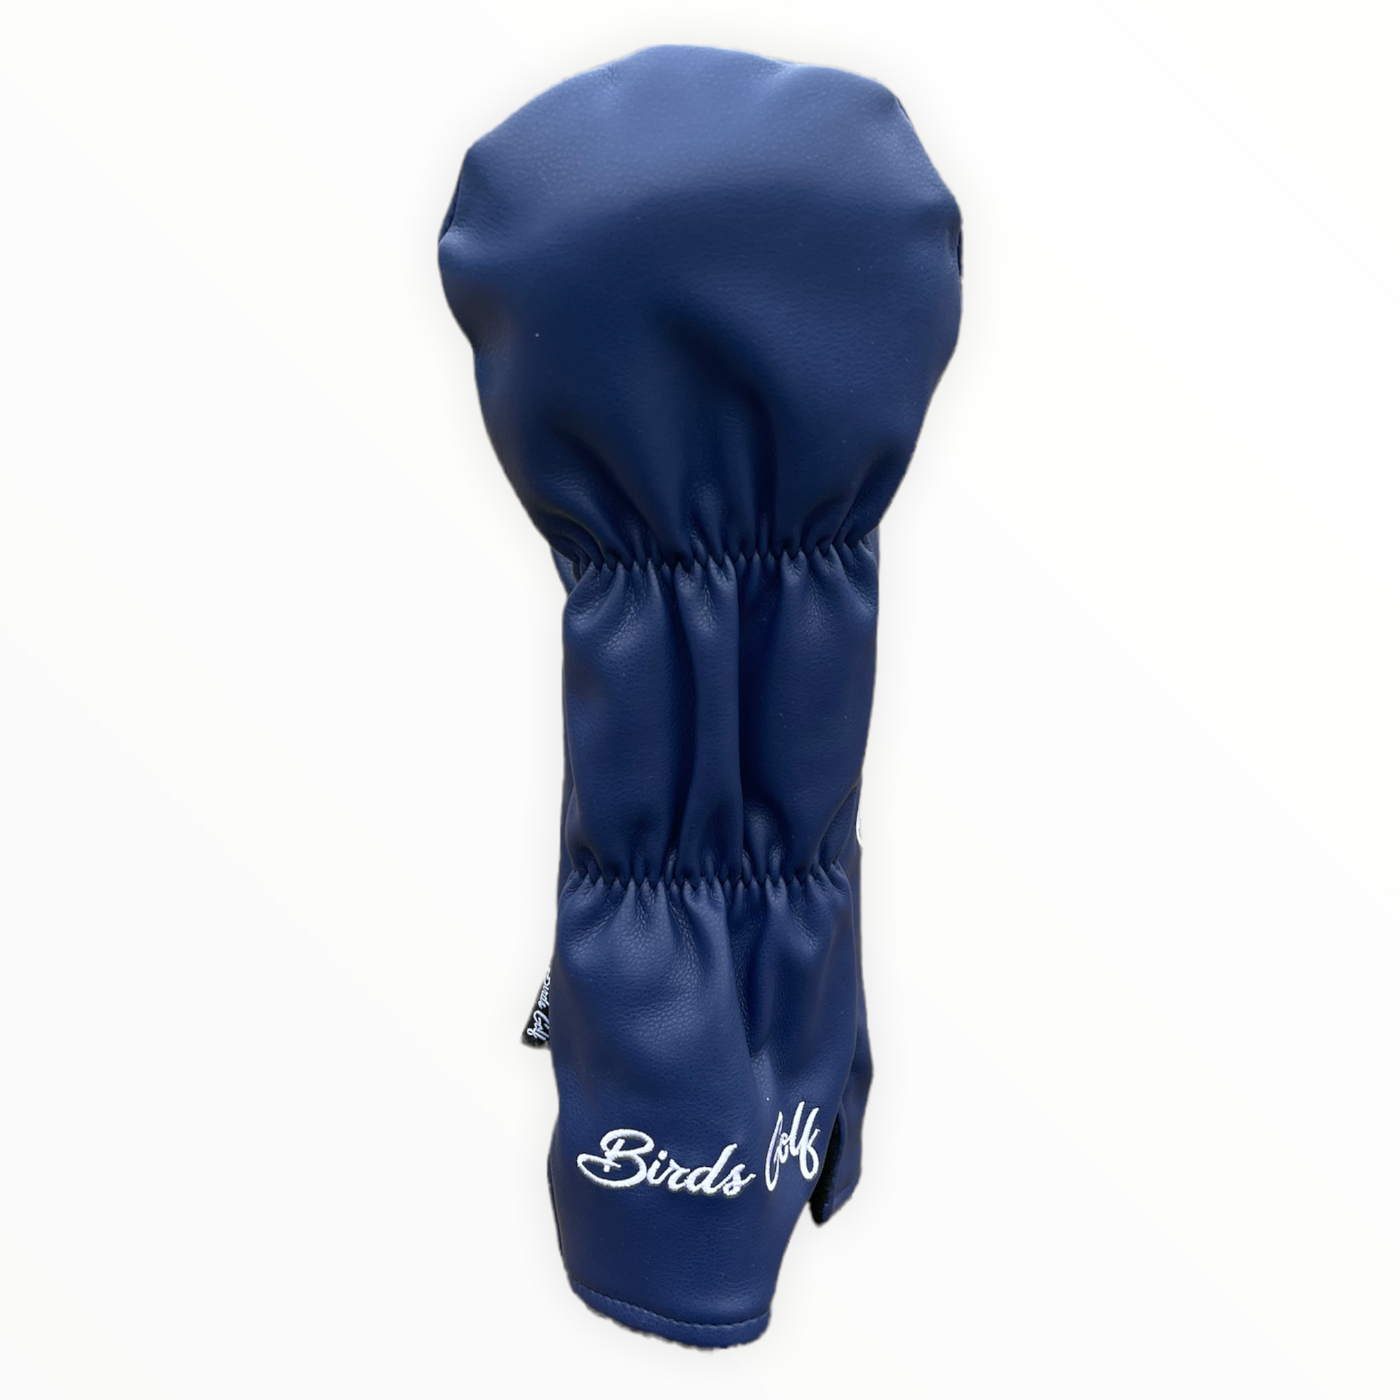 Scattered Birds Headcovers